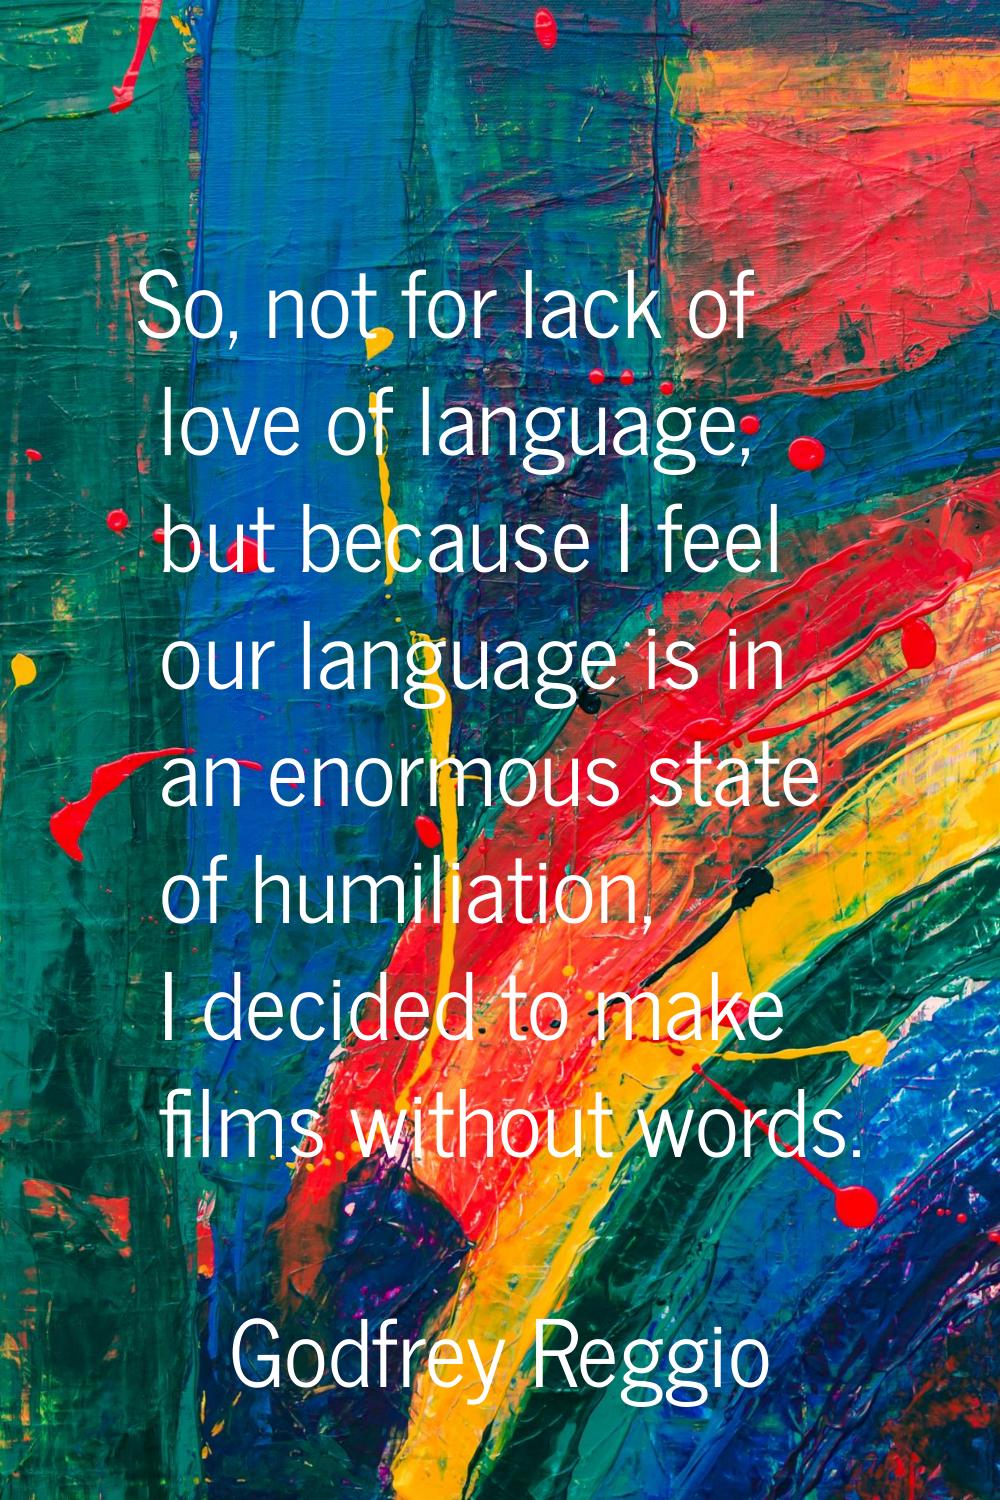 So, not for lack of love of language, but because I feel our language is in an enormous state of hu